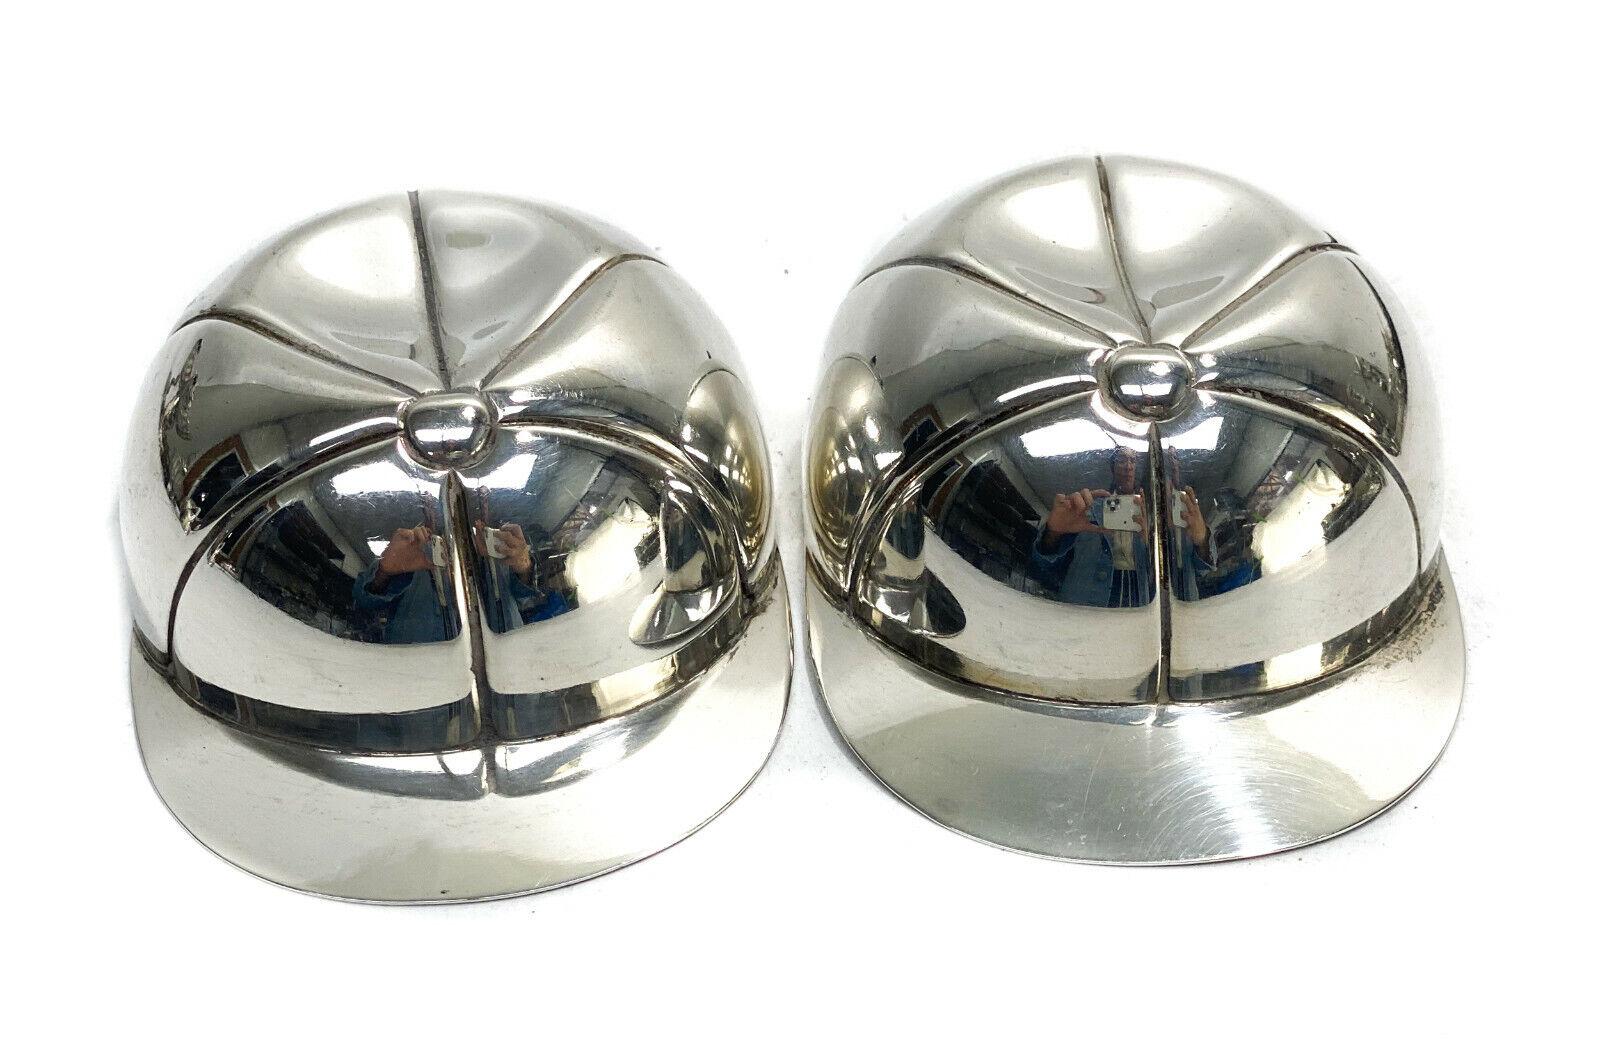 6 American Sterling Silver Caldwell Novelty Baseball Cap Salt Cellars Nut Bowls

Uniquely modeled after baseball caps and monogrammed 